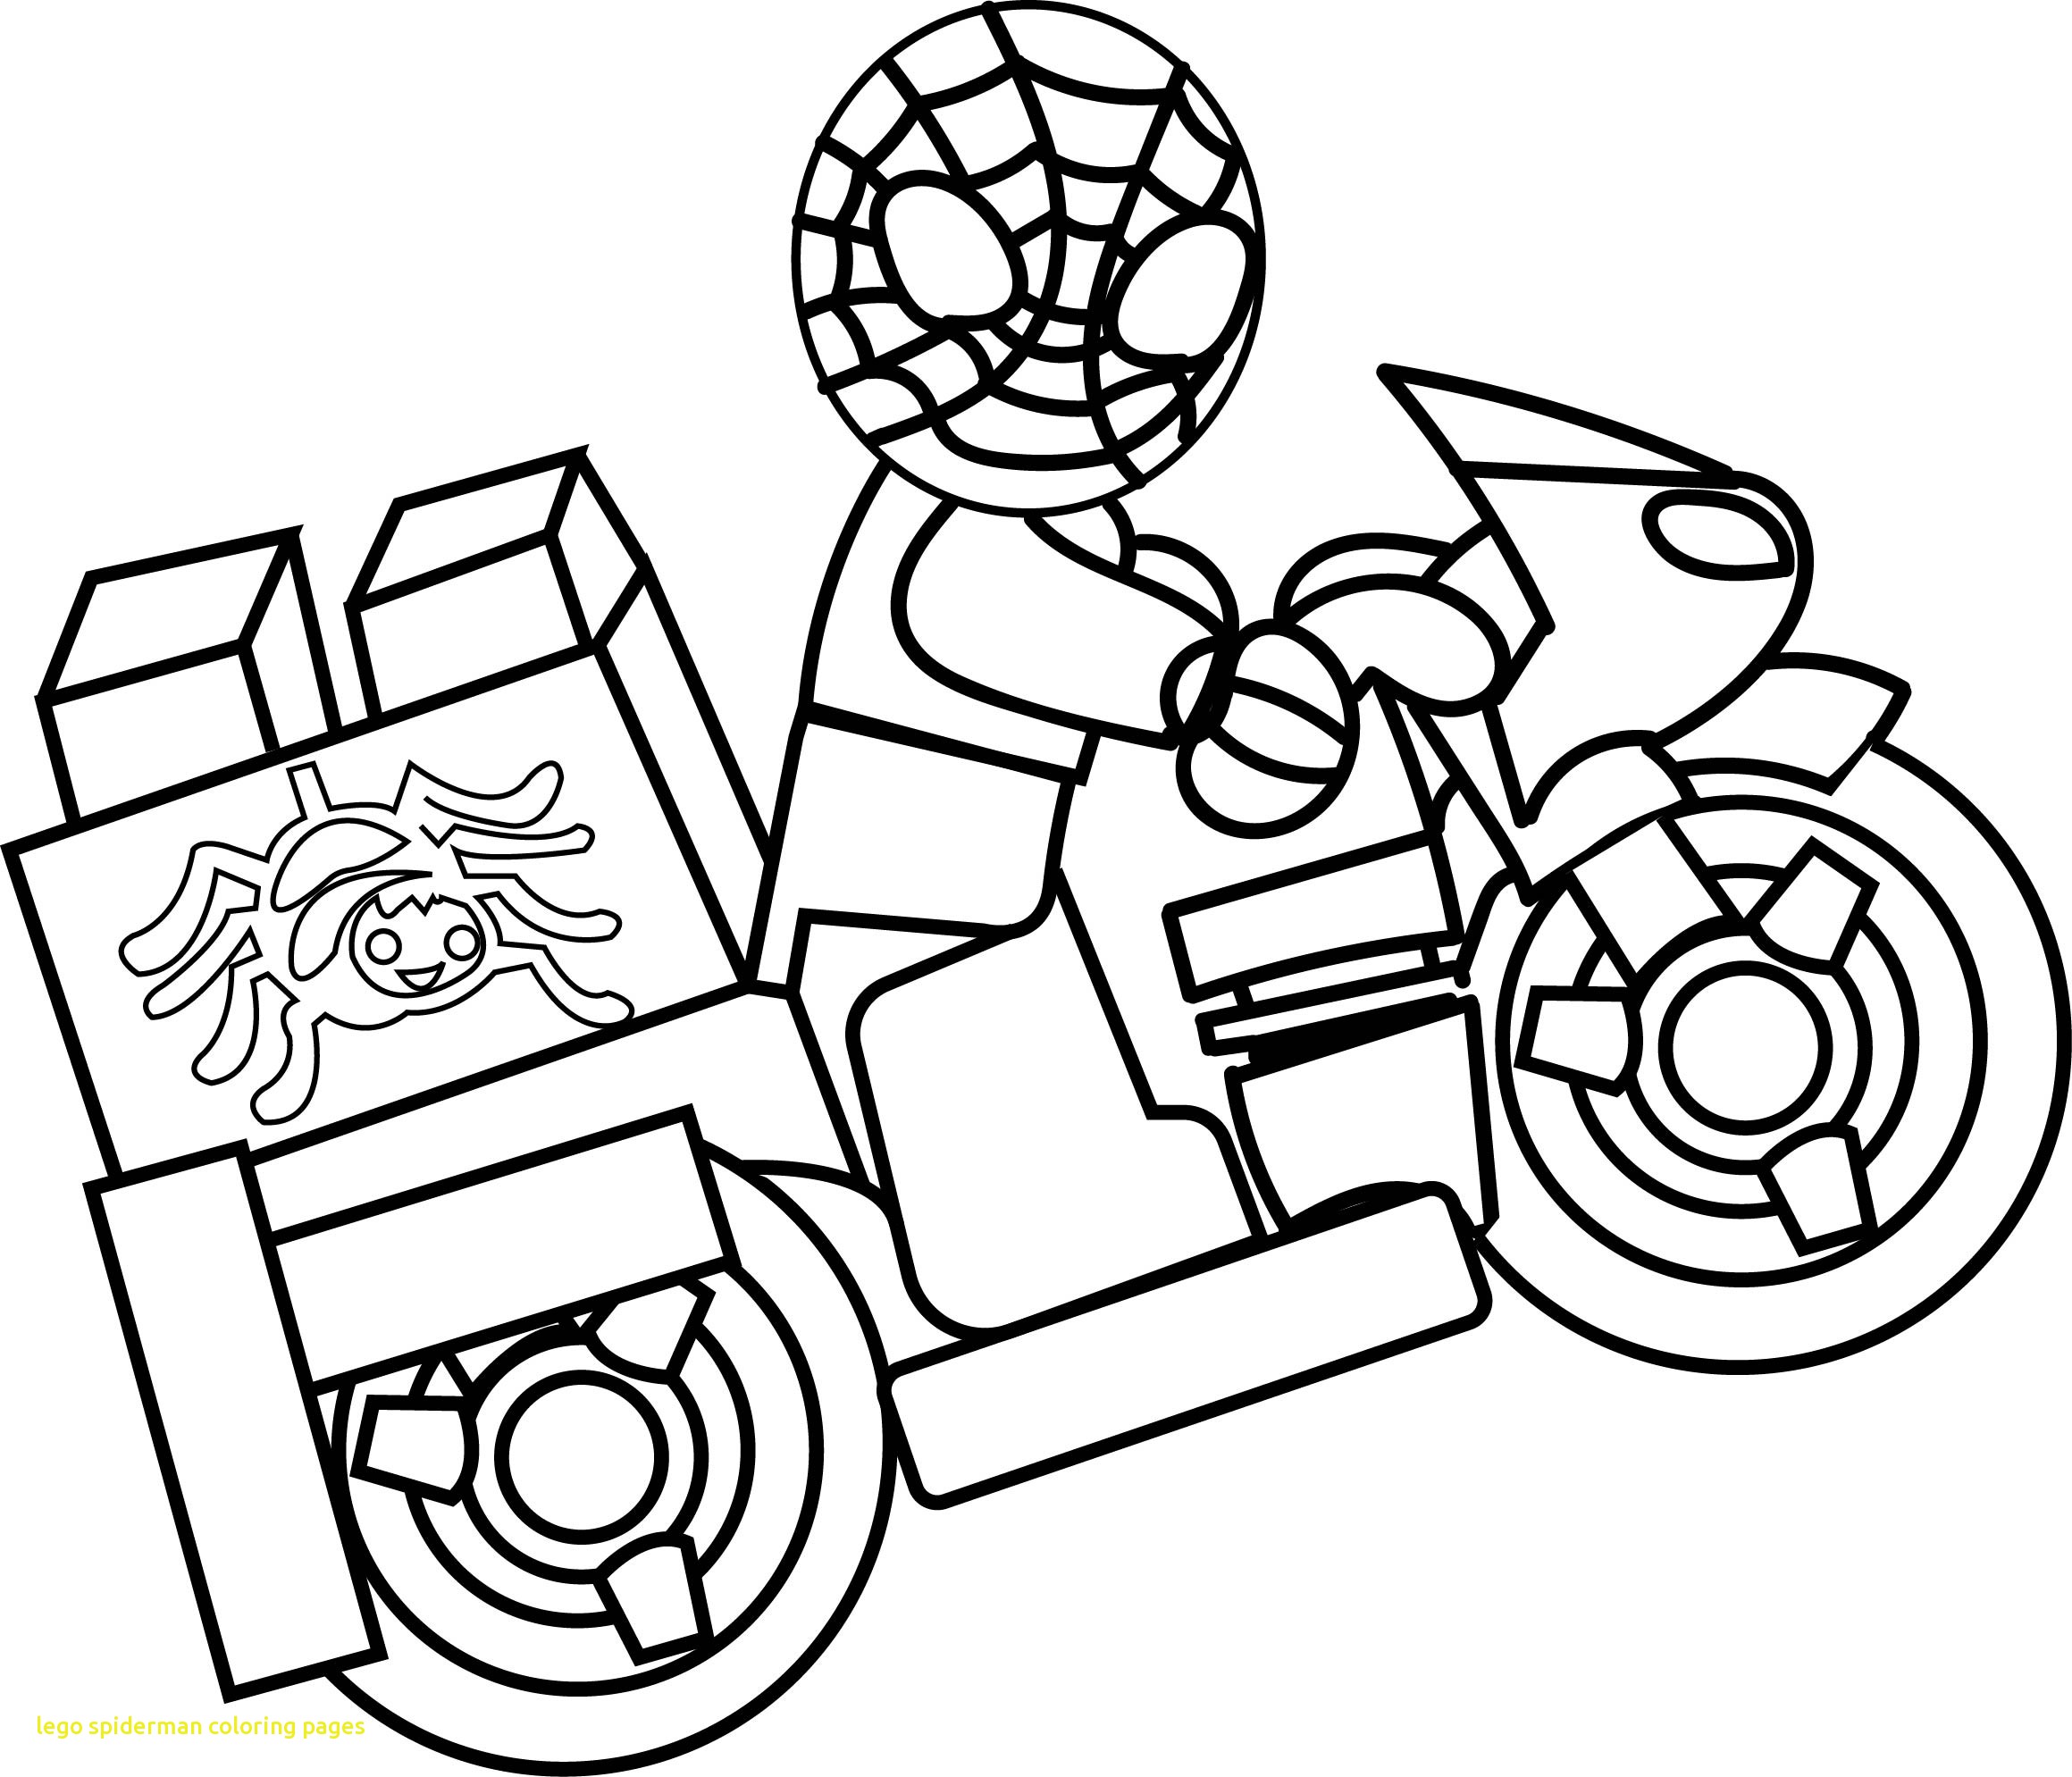 Lego Spiderman Coloring Pages at GetColorings.com | Free printable